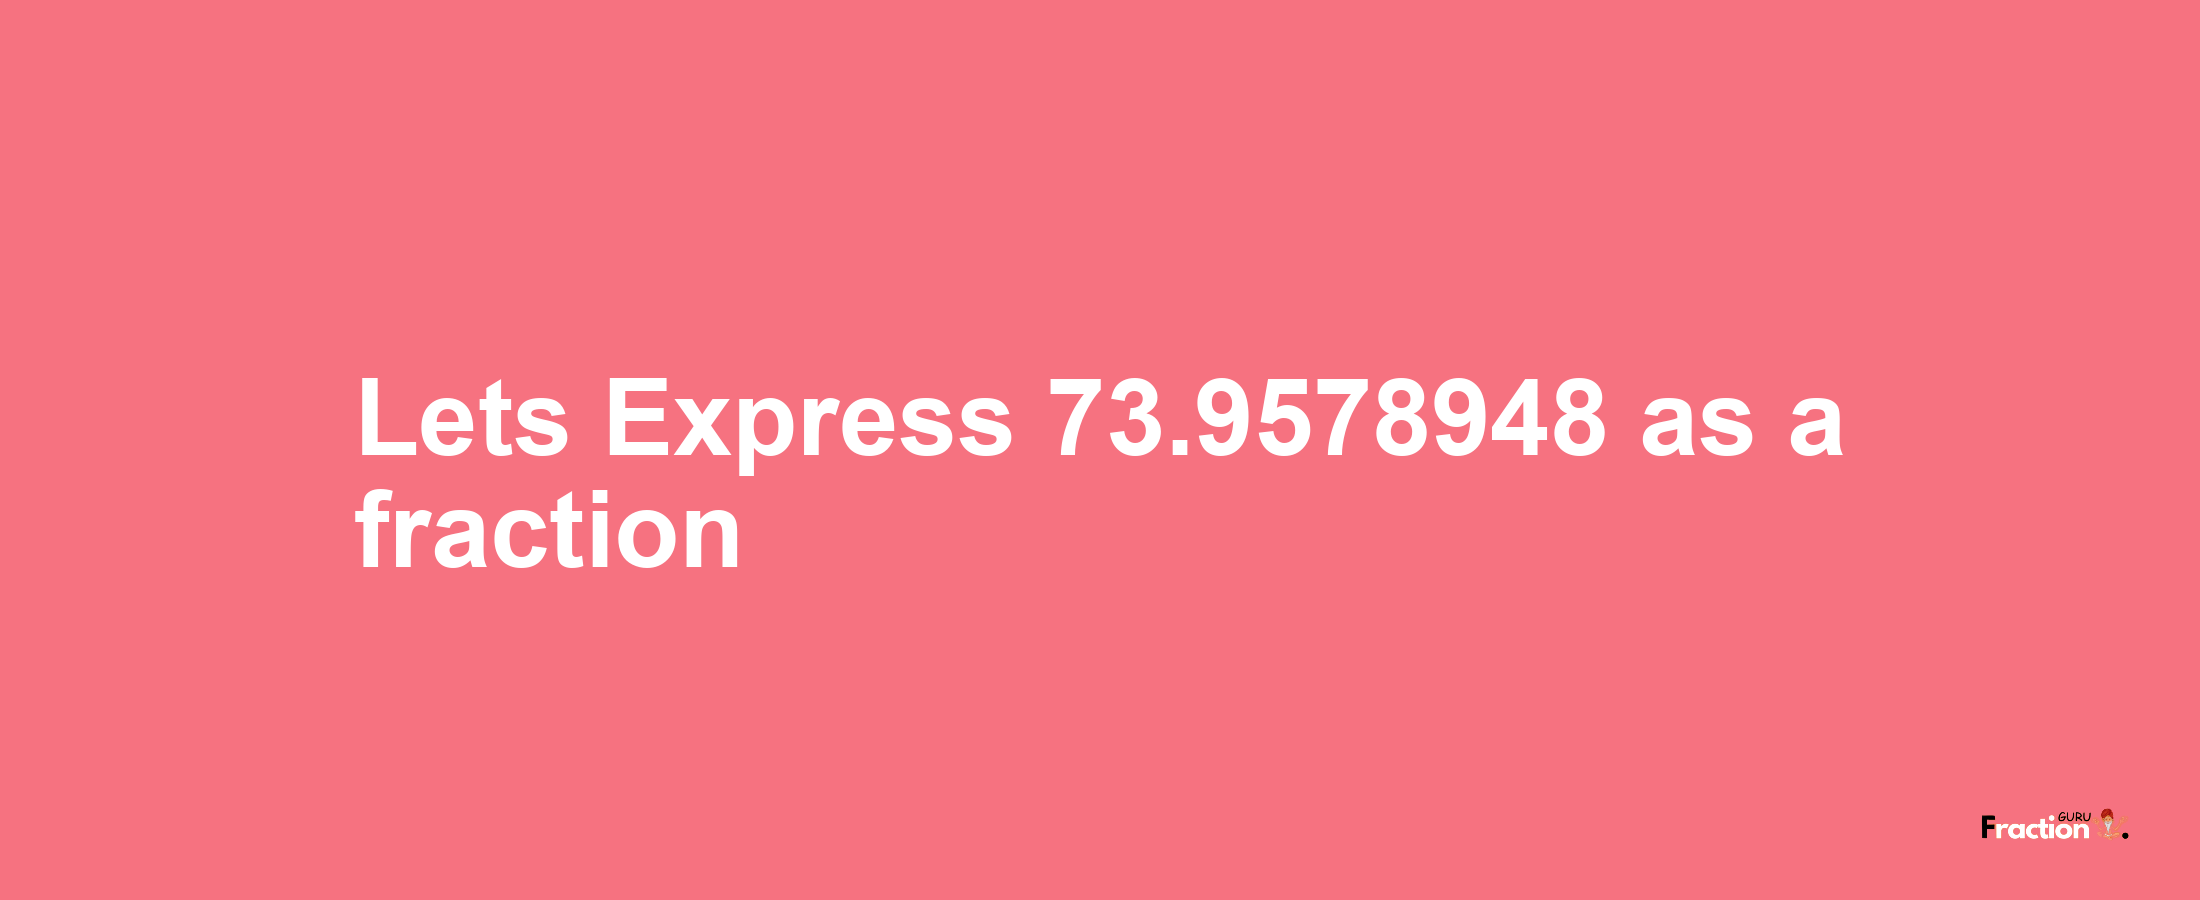 Lets Express 73.9578948 as afraction